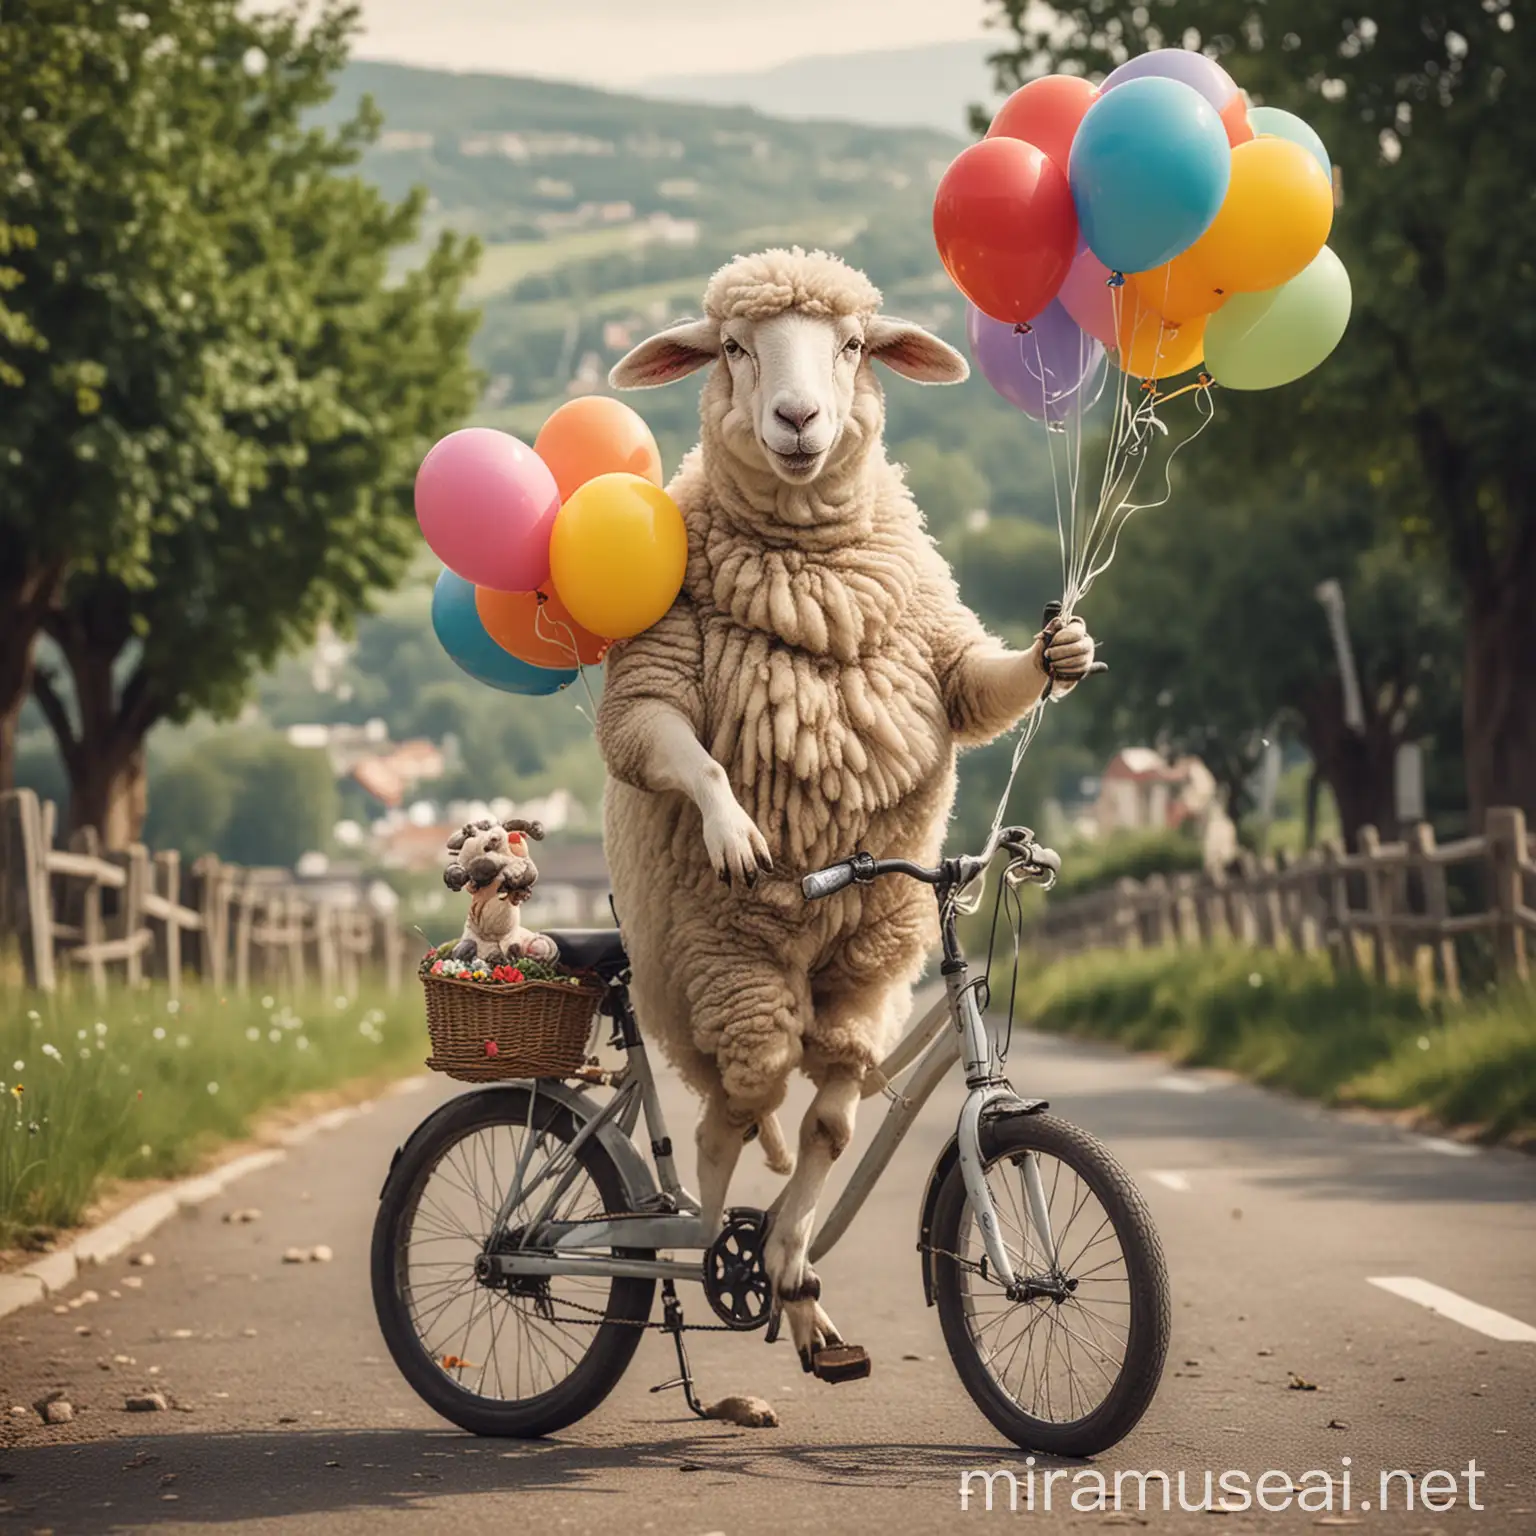 Smiling sheep riding a bike and holding a bunch of balloons